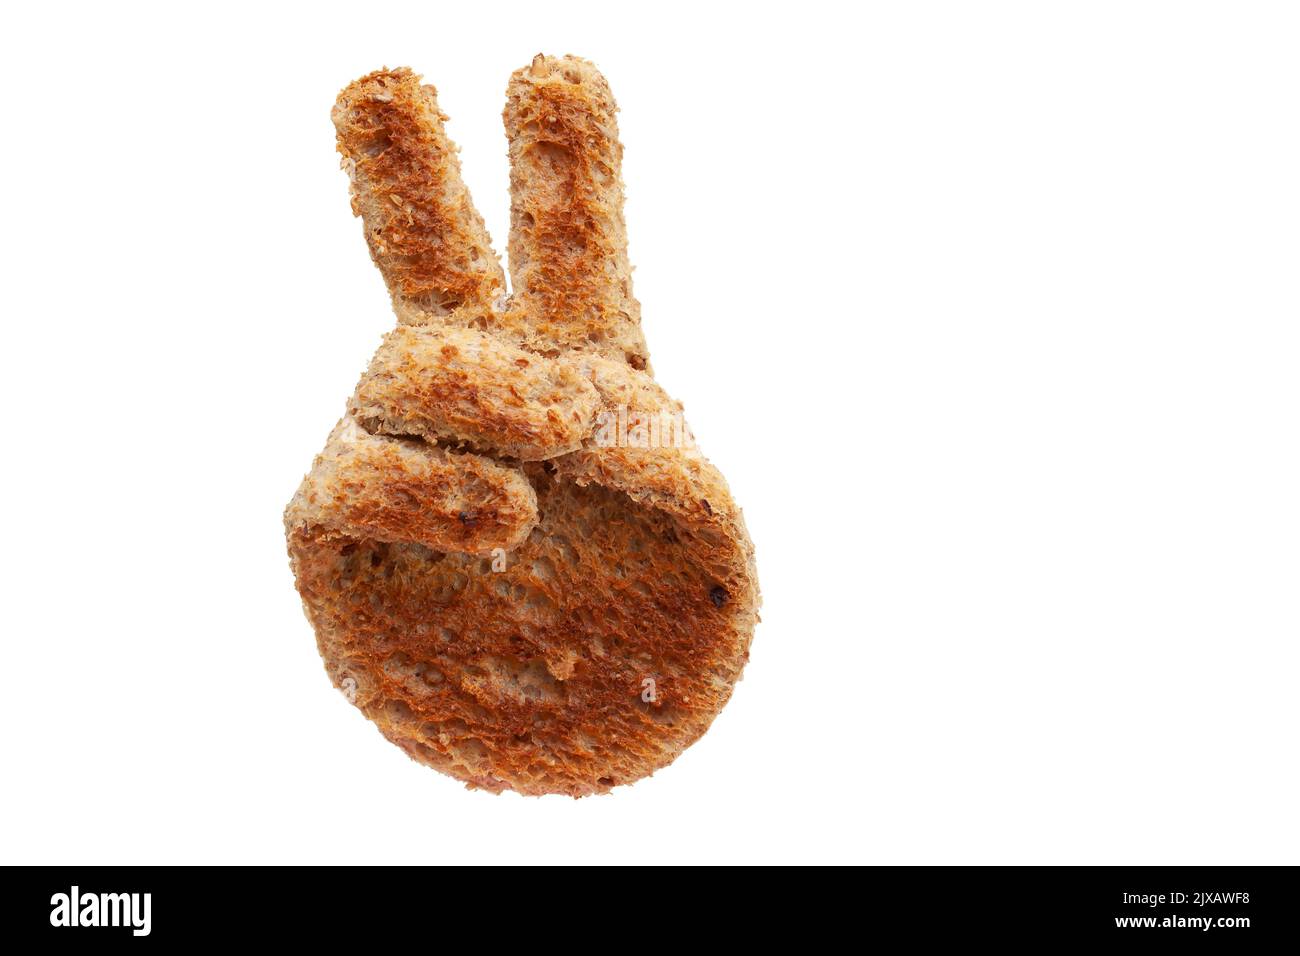 Hand peace sign made from toasted brown bread slice isolated on white background. Fun food concept and symbol Stock Photo